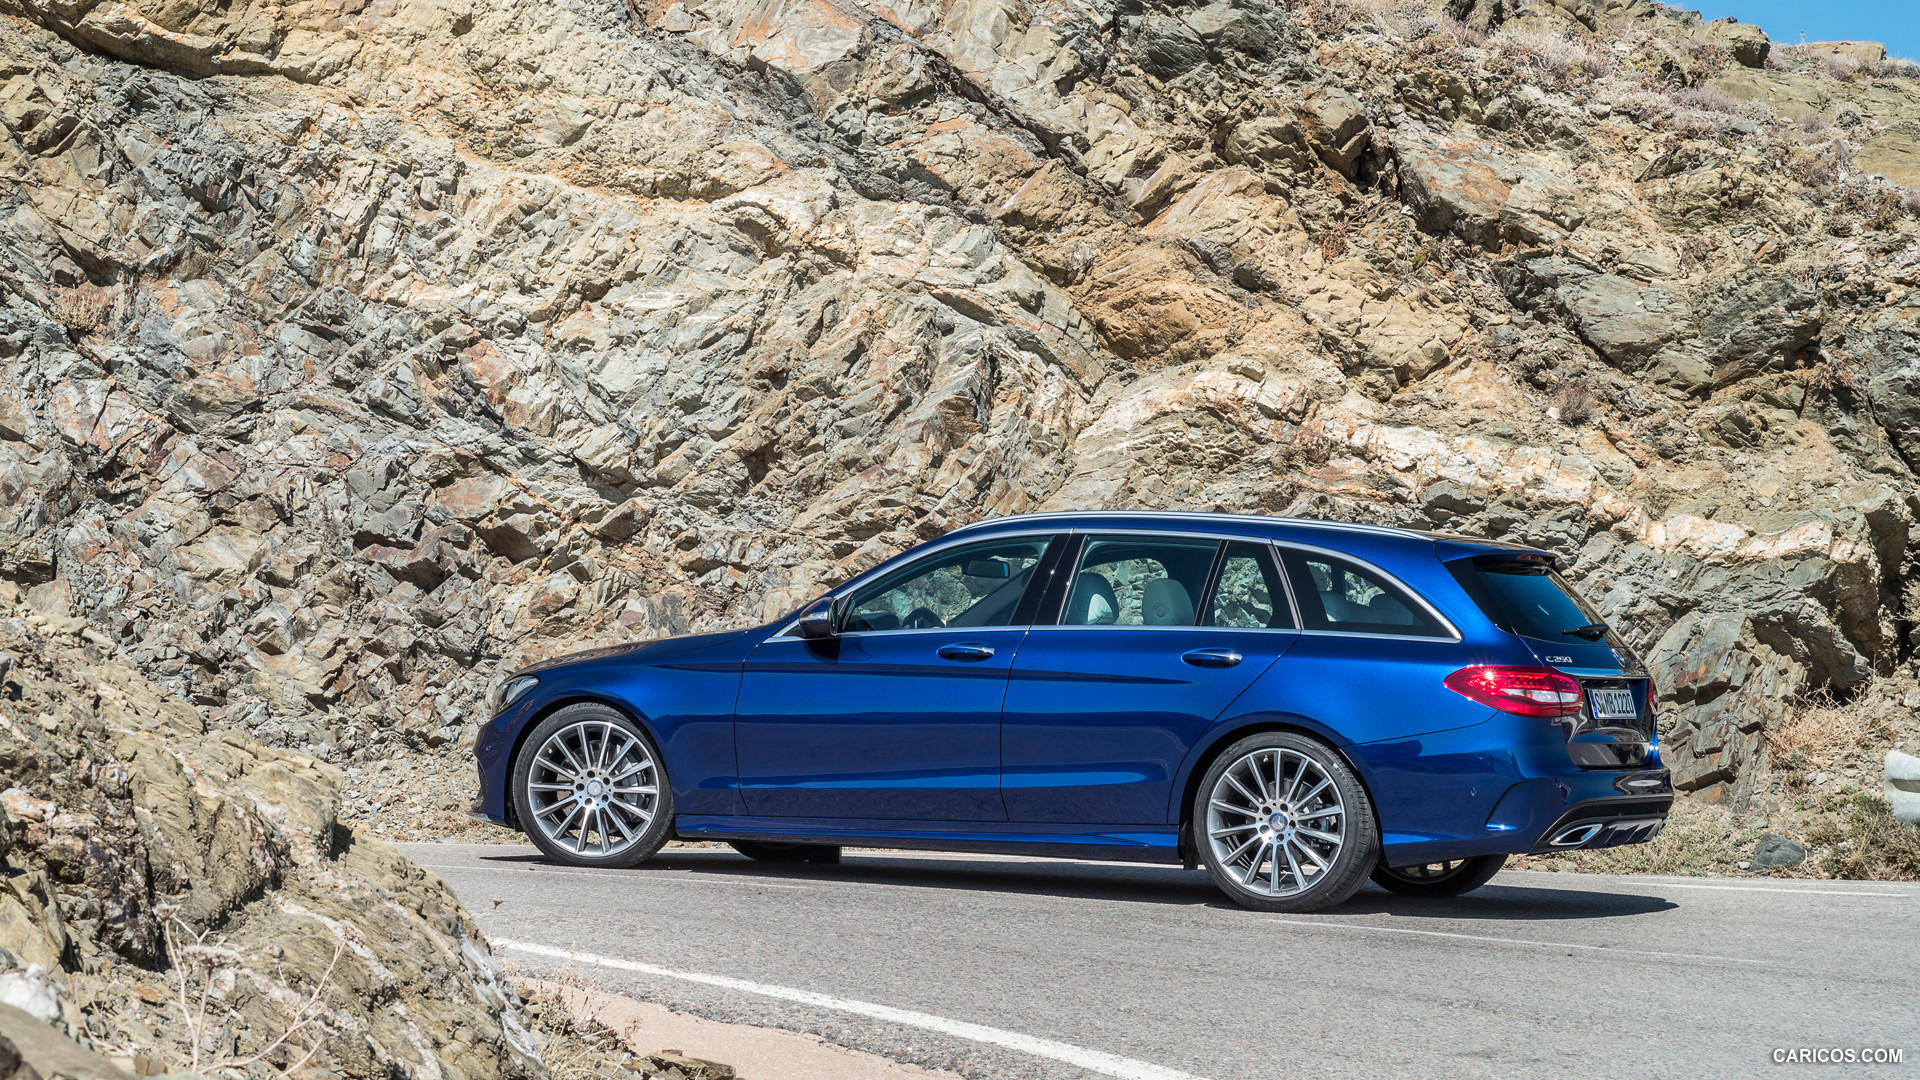 2015 Mercedes-Benz C-Class Estate C250 BlueTEC 4MATIC (AMG sports package) - Side, #57 of 173